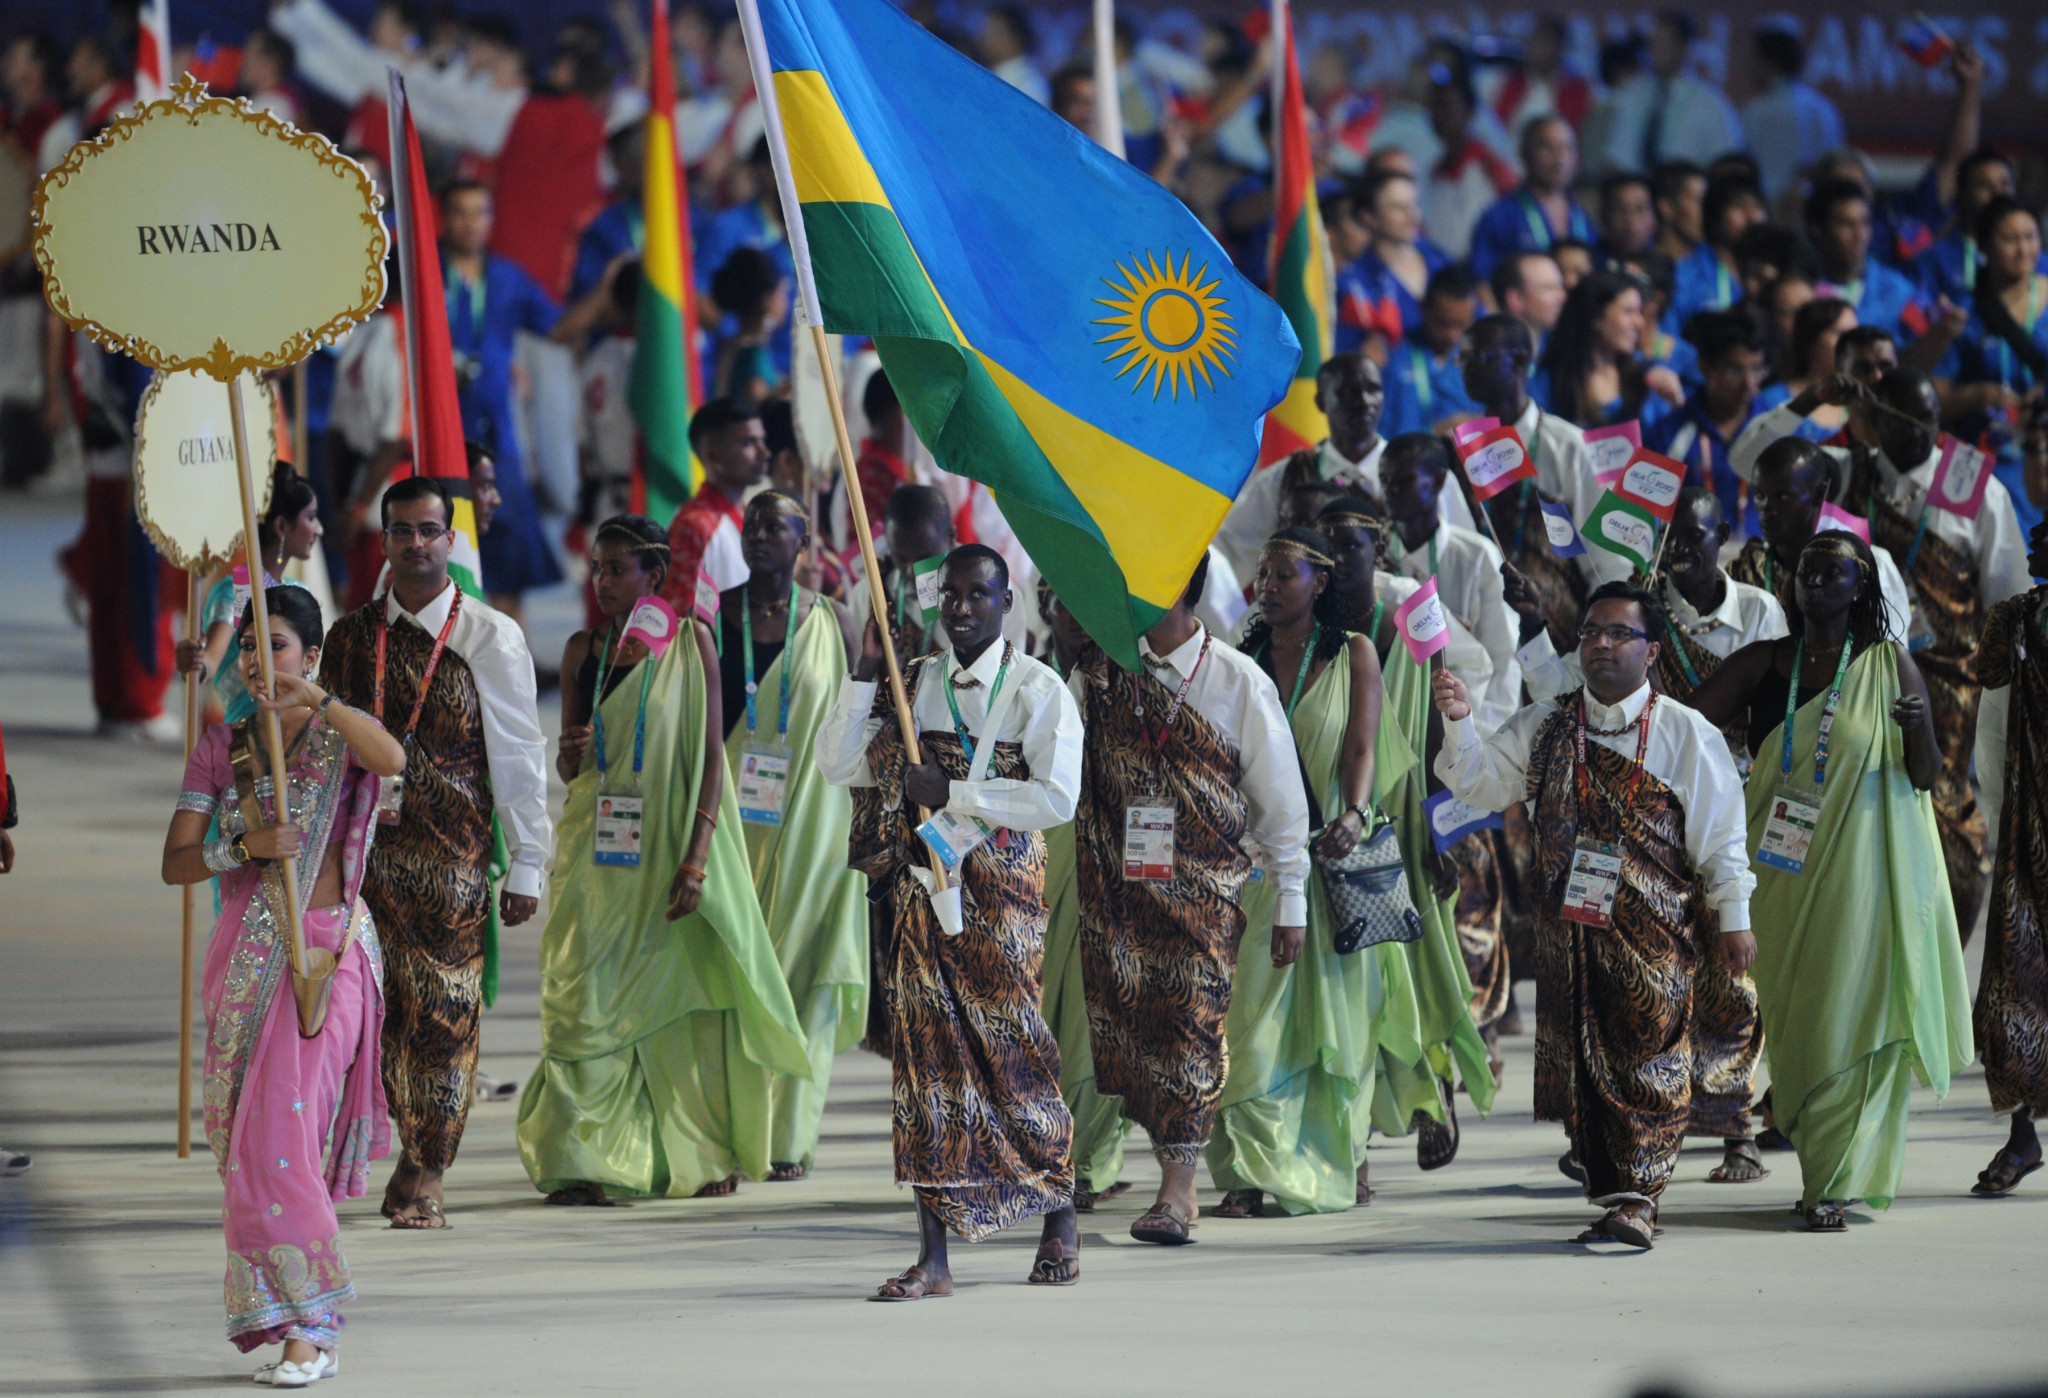 Rwanda first competed at the Commonwealth Games in 2010 after joining the Commonwealth of Nations in 2009 ©Getty Images